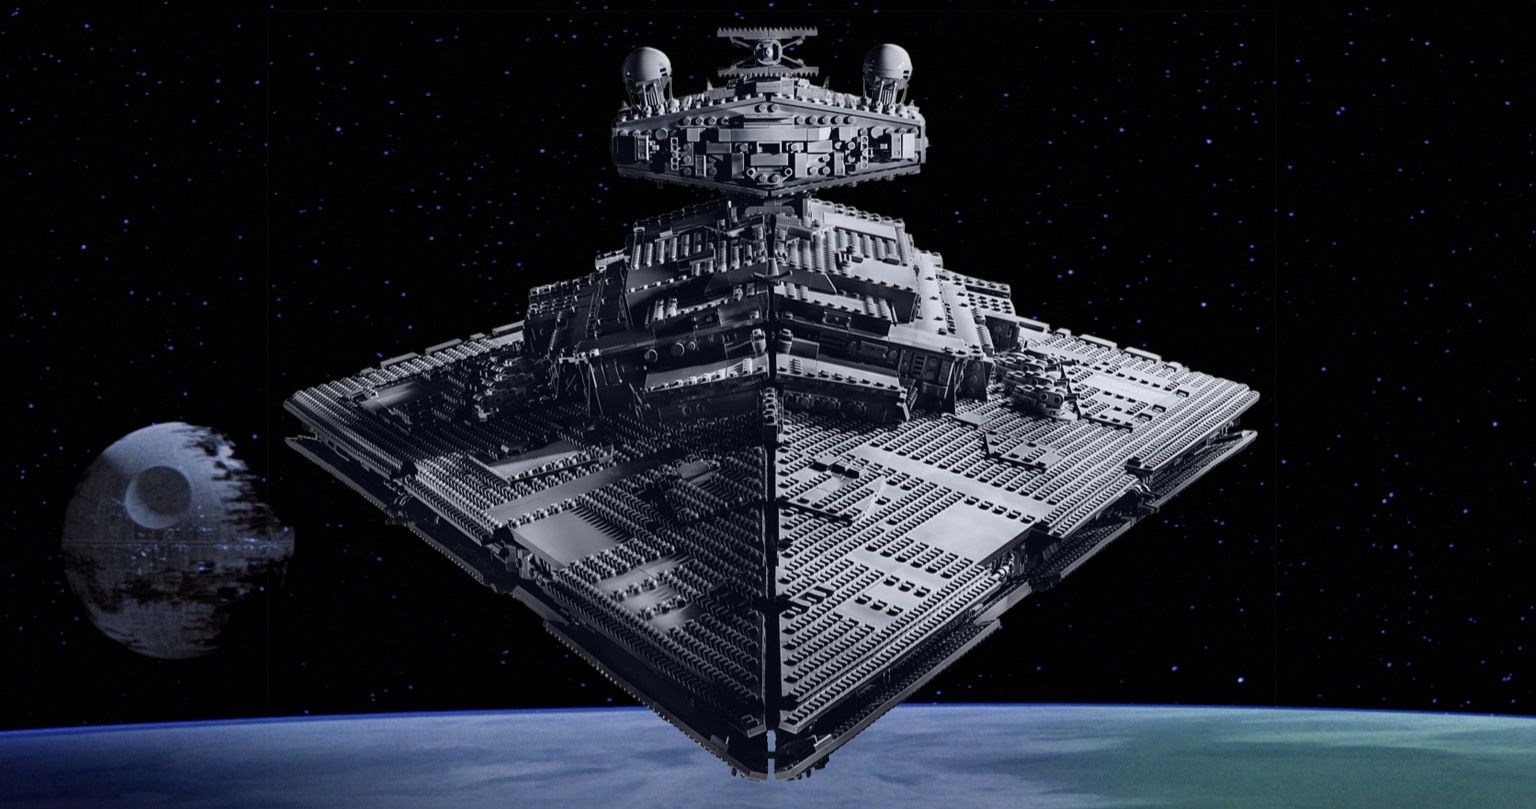 Massive Star Wars Star Destroyer LEGO Set Has 4,700 Pieces &amp; a Huge Price Tag